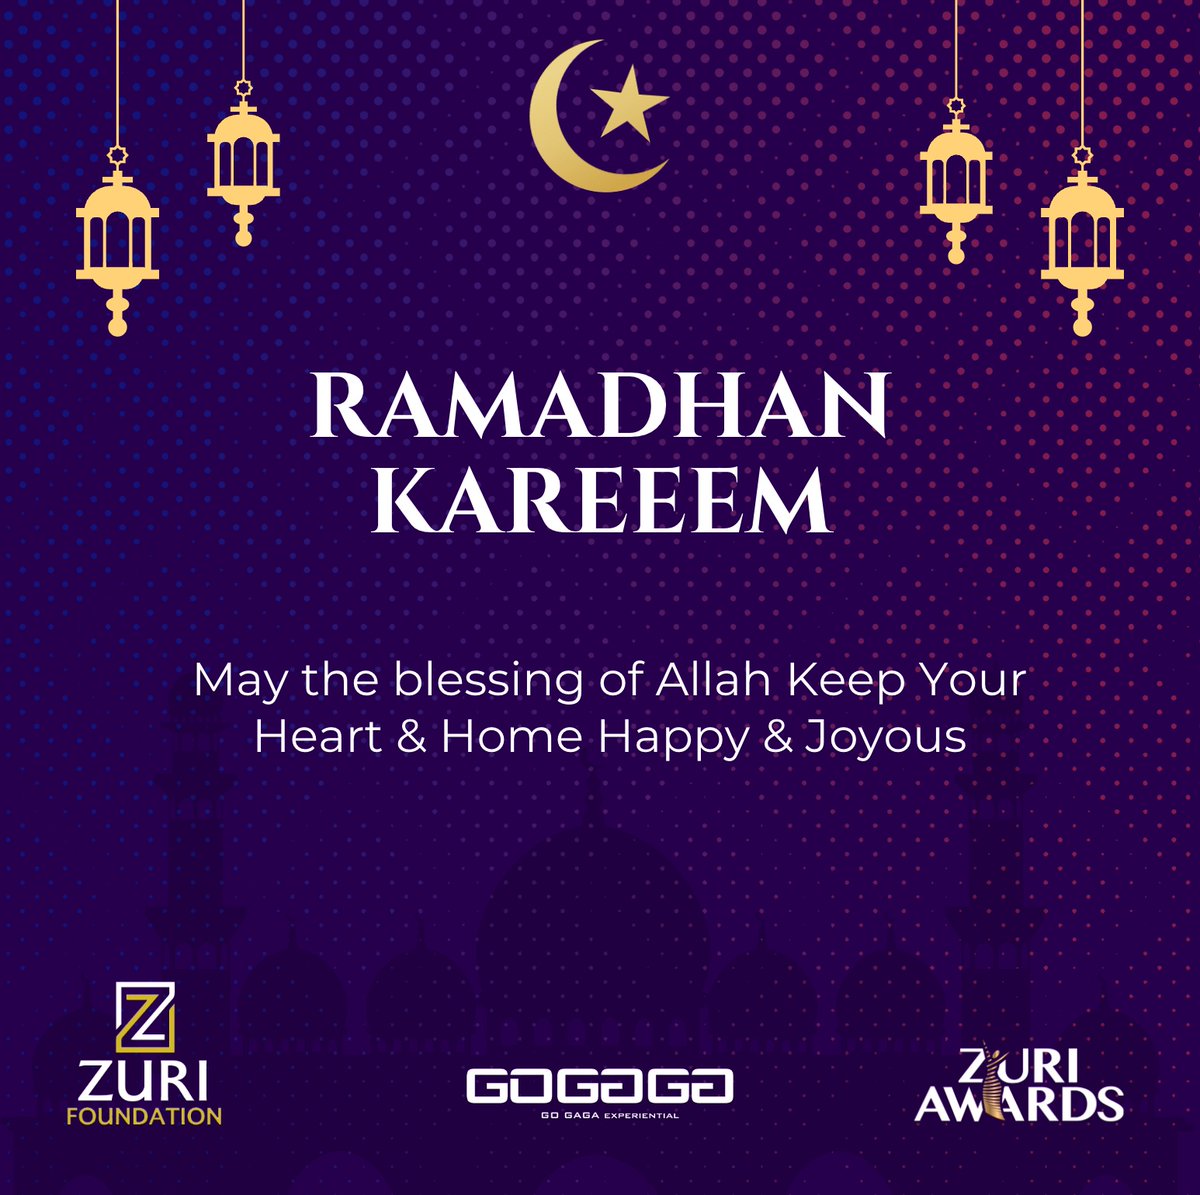 May this holy month bring peace, blessings, and strength to our Muslim brothers and sisters. #ZuriAwards #ZuriFoundation #RamadanMubarak